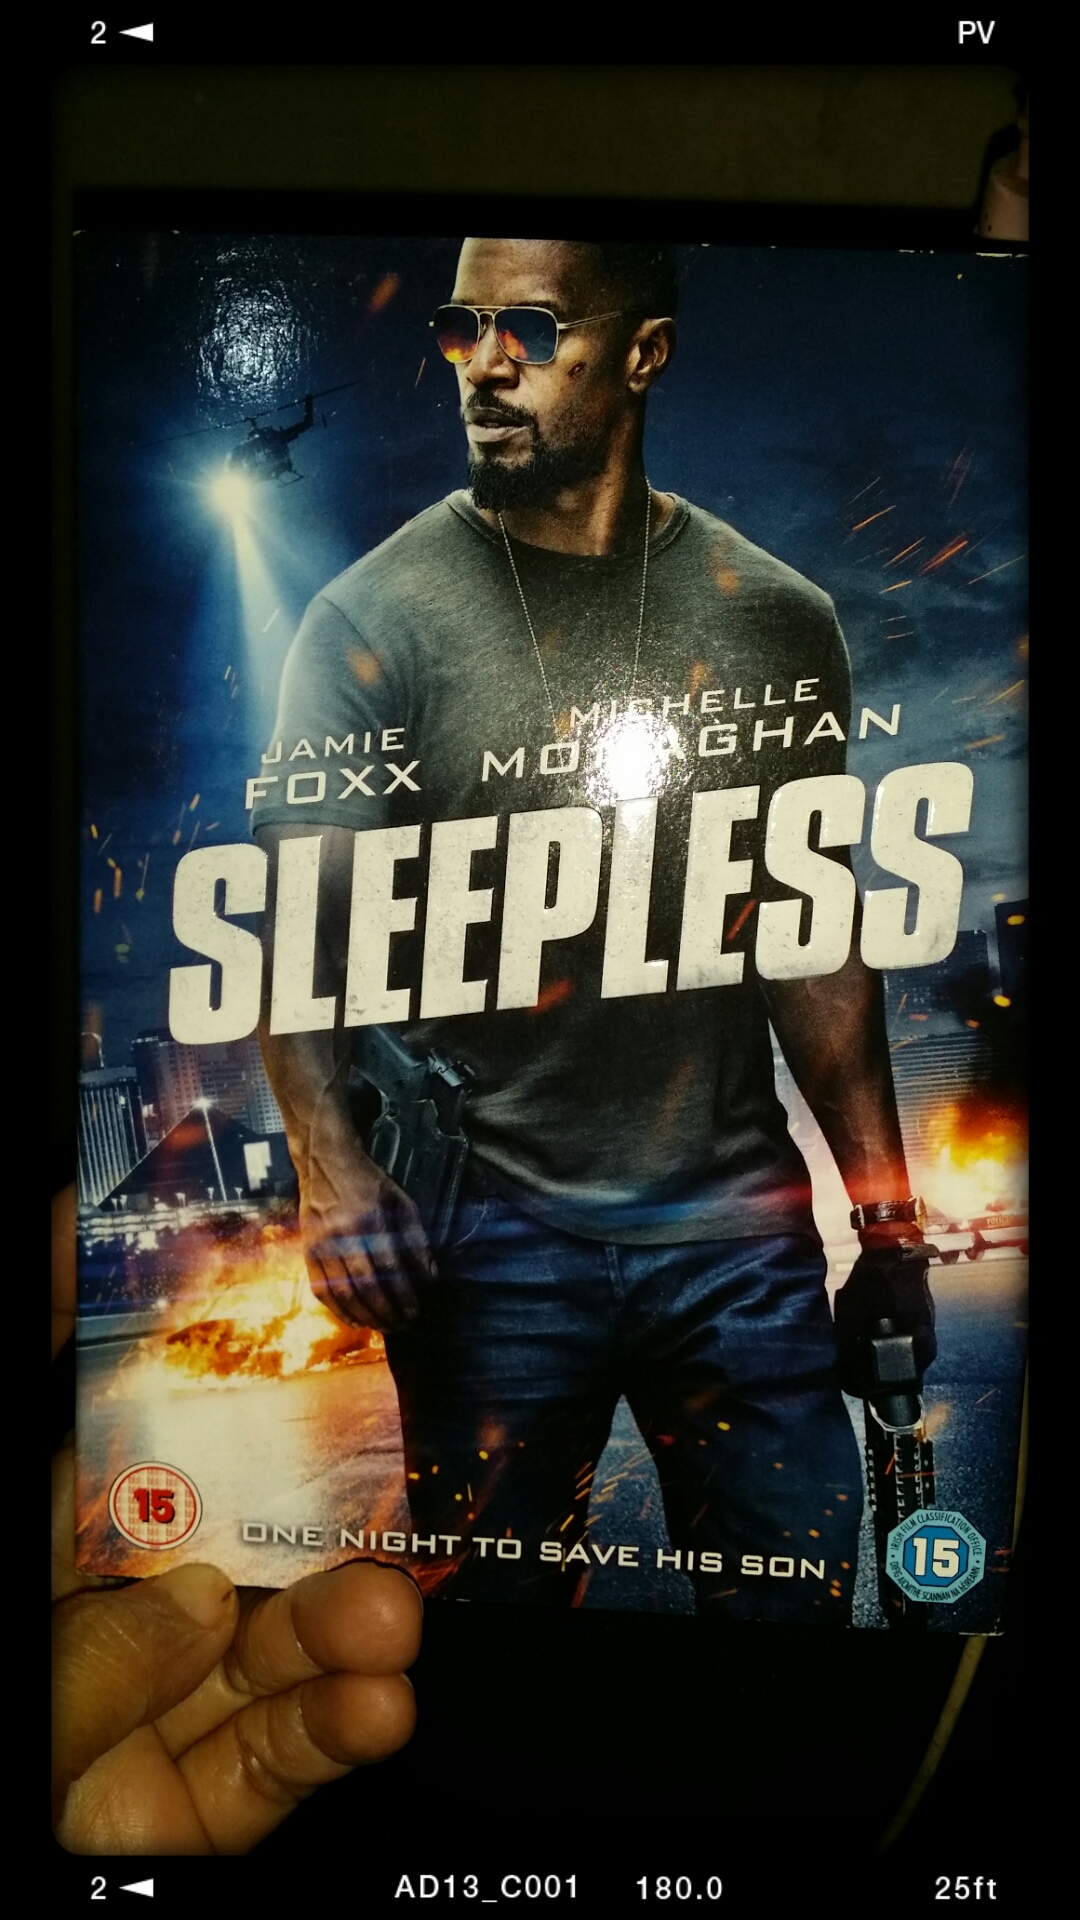 sleepless dvd tape with my fingers at the bottom left.